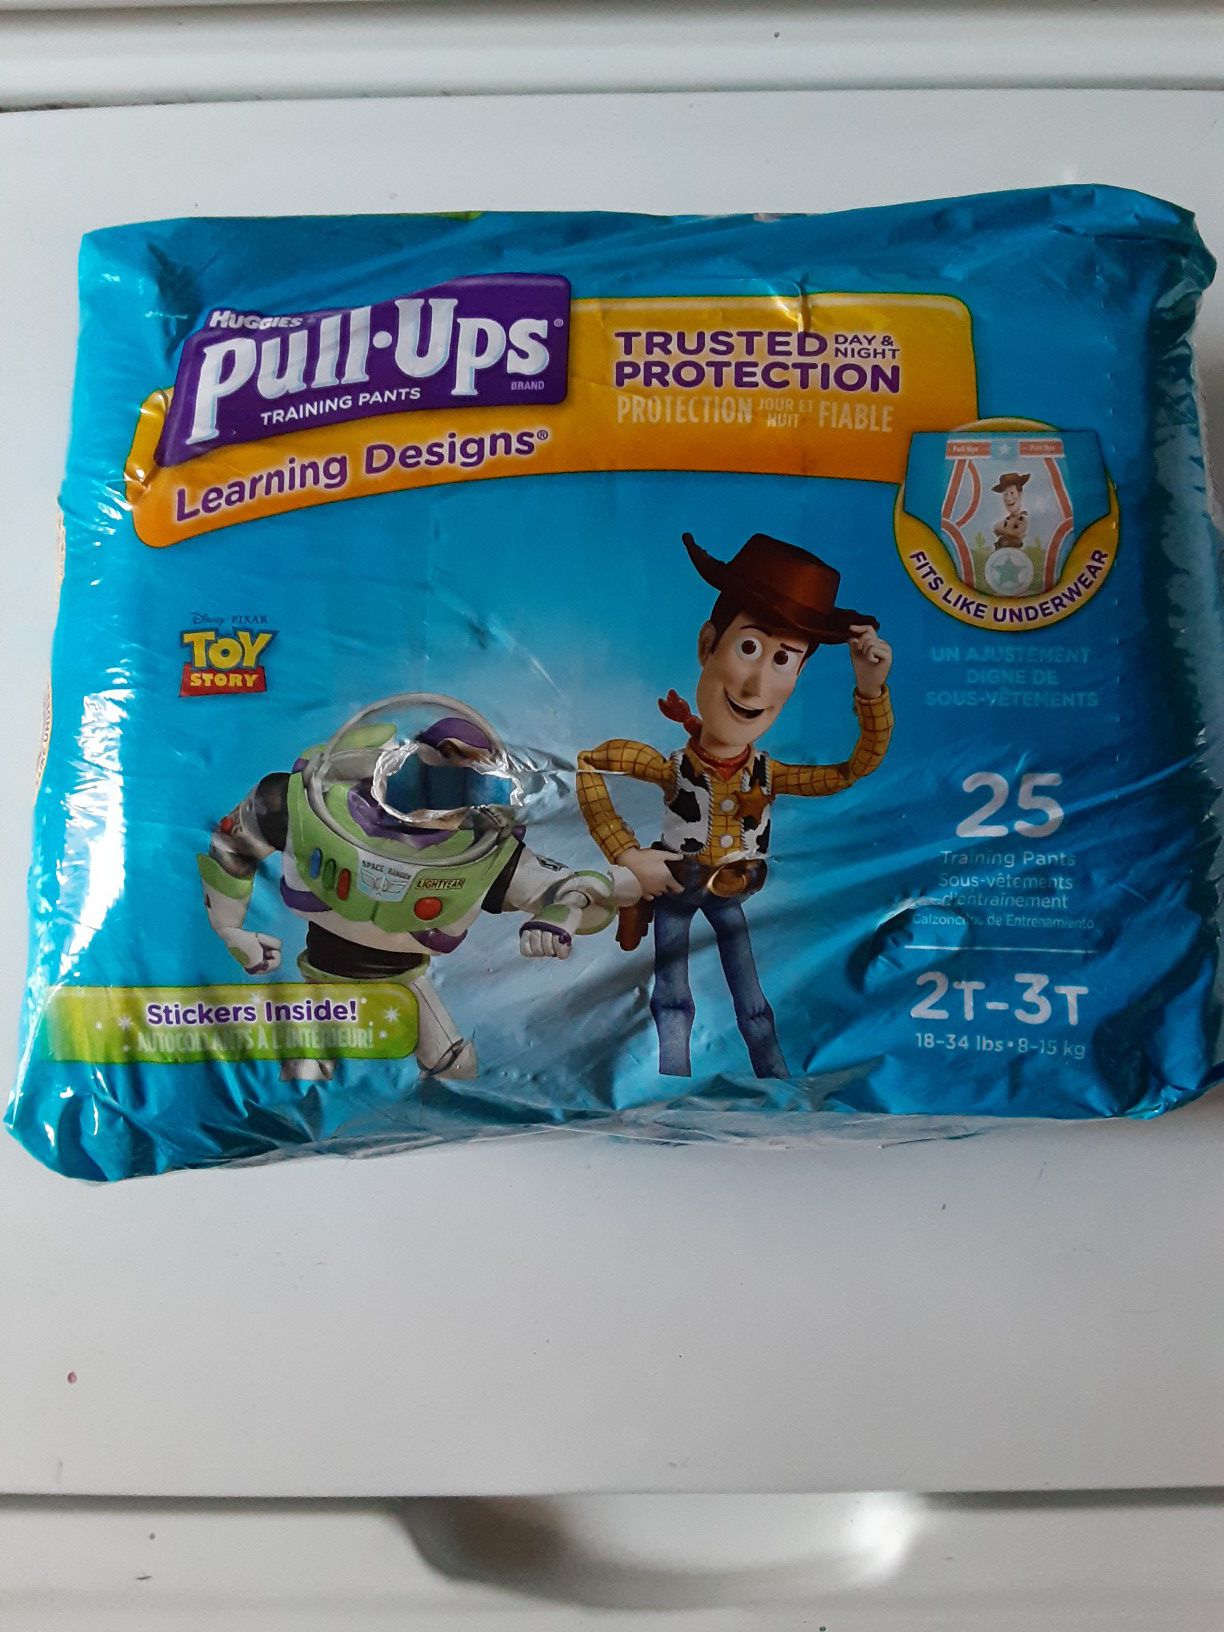 Pampers pick up free